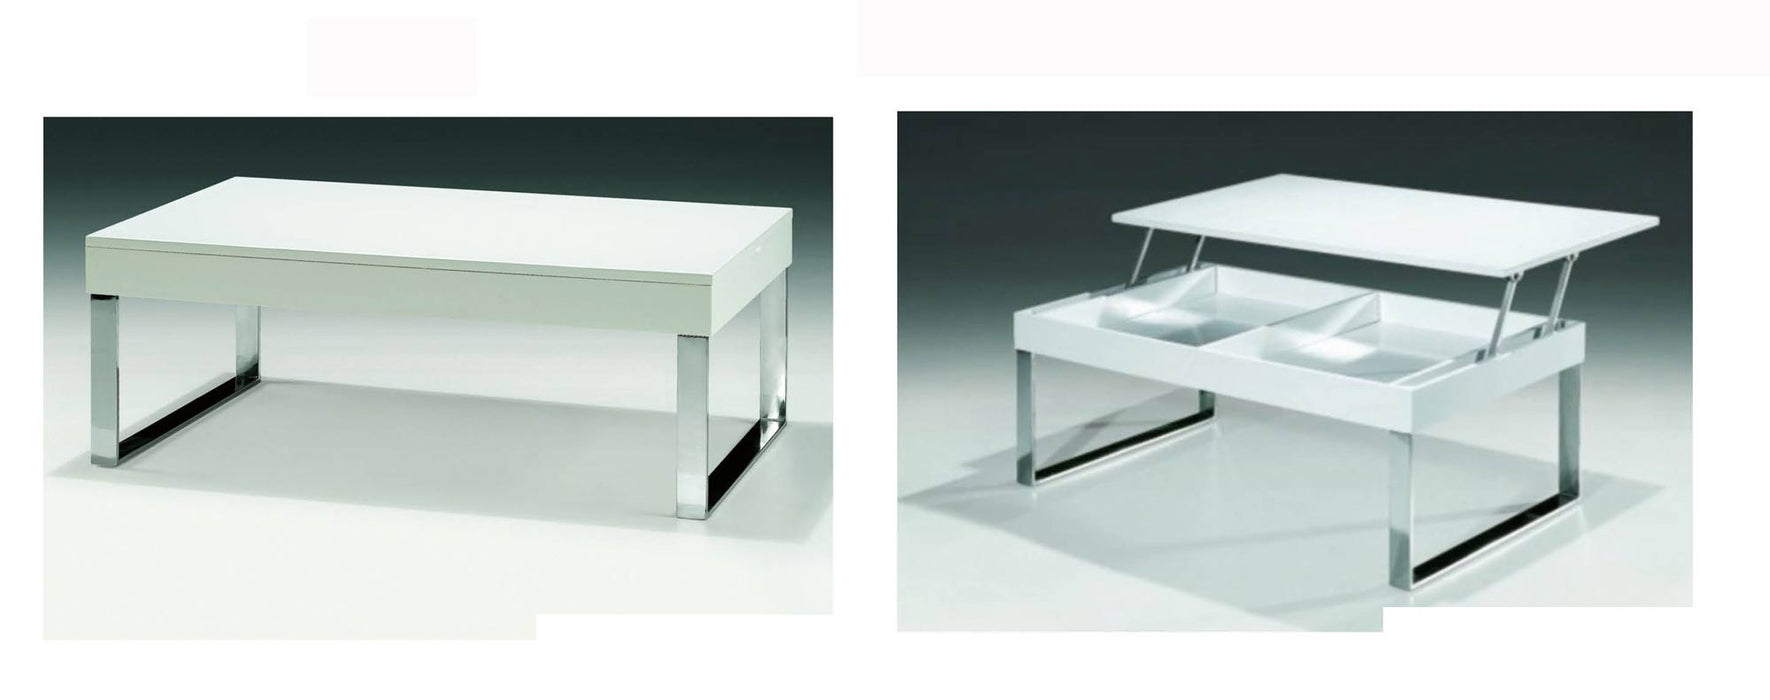 ESF Furniture - J030 Modern Coffee Table in White - J030 White Coffee Table